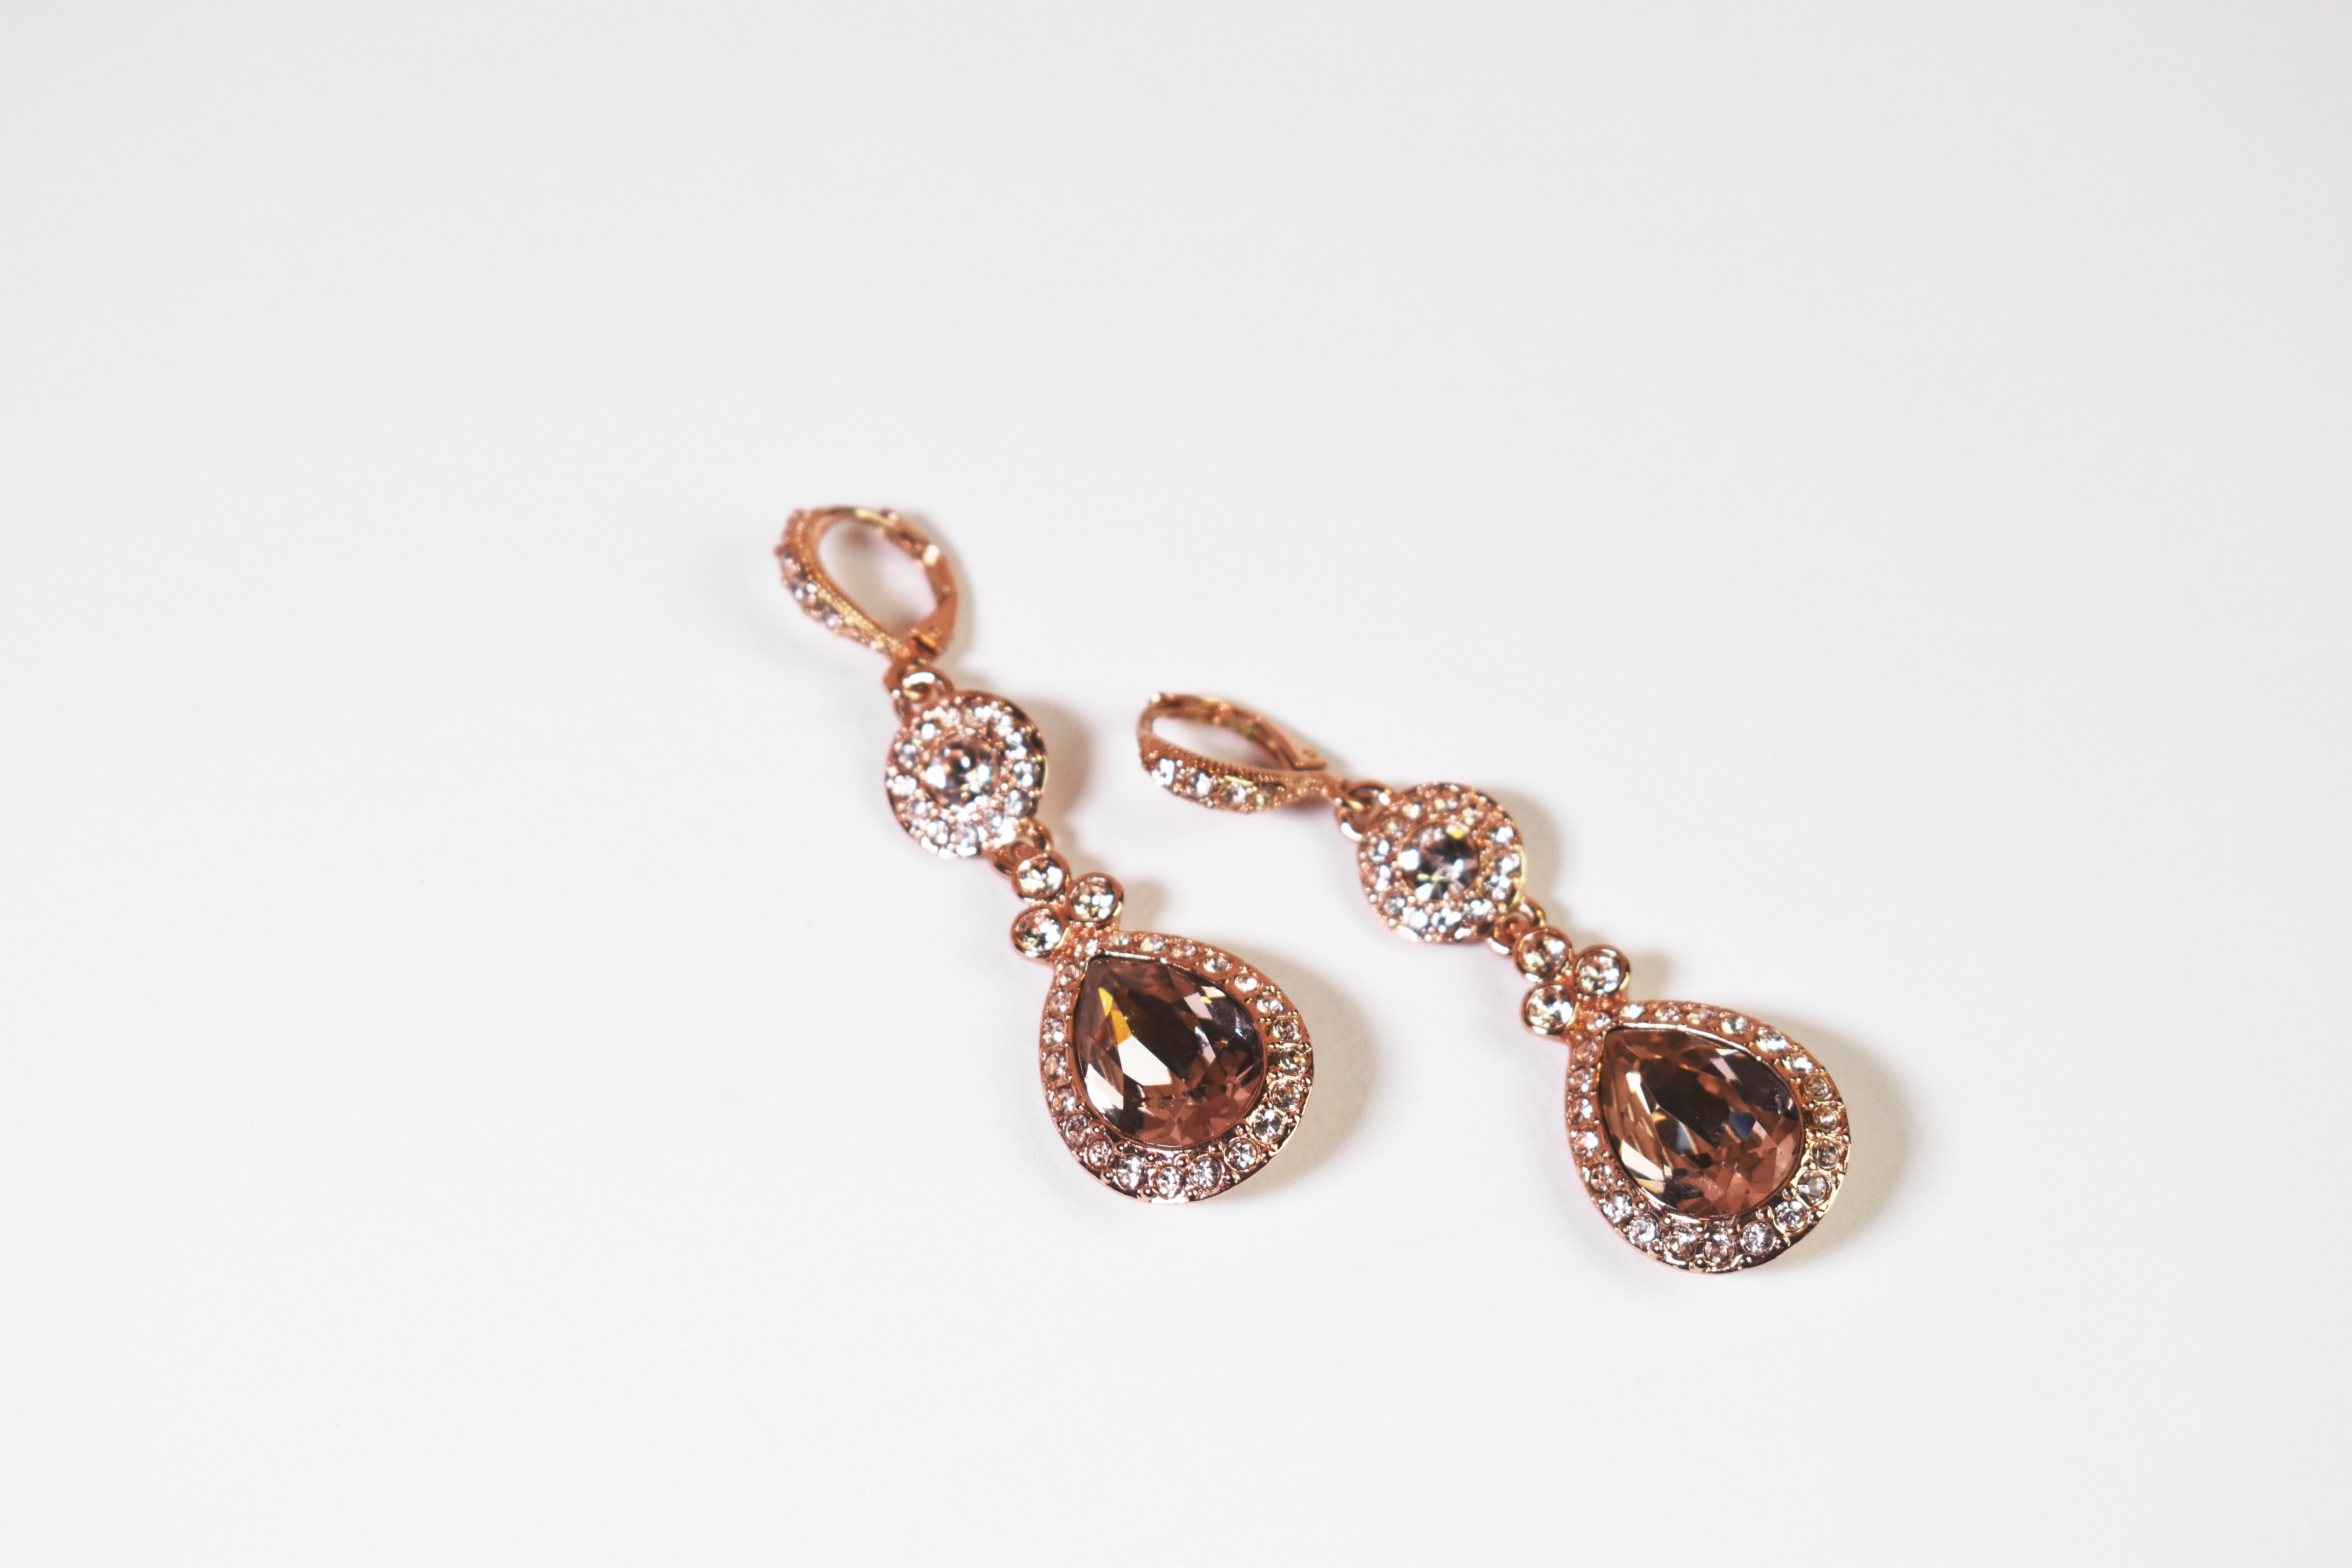 rose gold drop earrings with smoky quartz crystals on a white surface